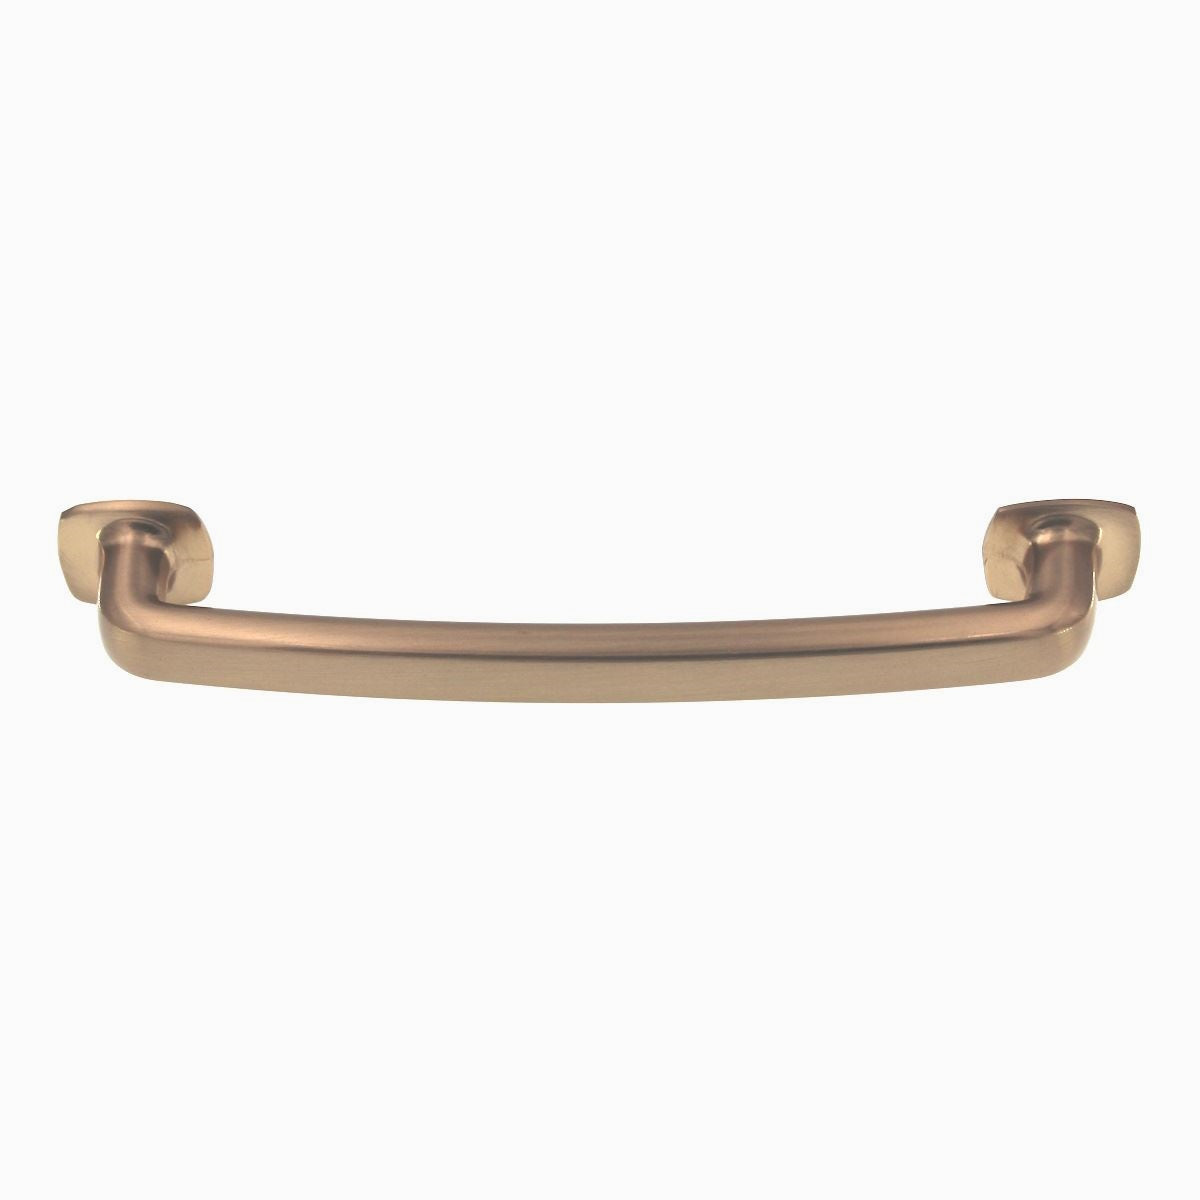 Pride Vail ADA Friendly Cabinet Arch Pull 5" (128mm) Ctr Rose Gold P86374-RG